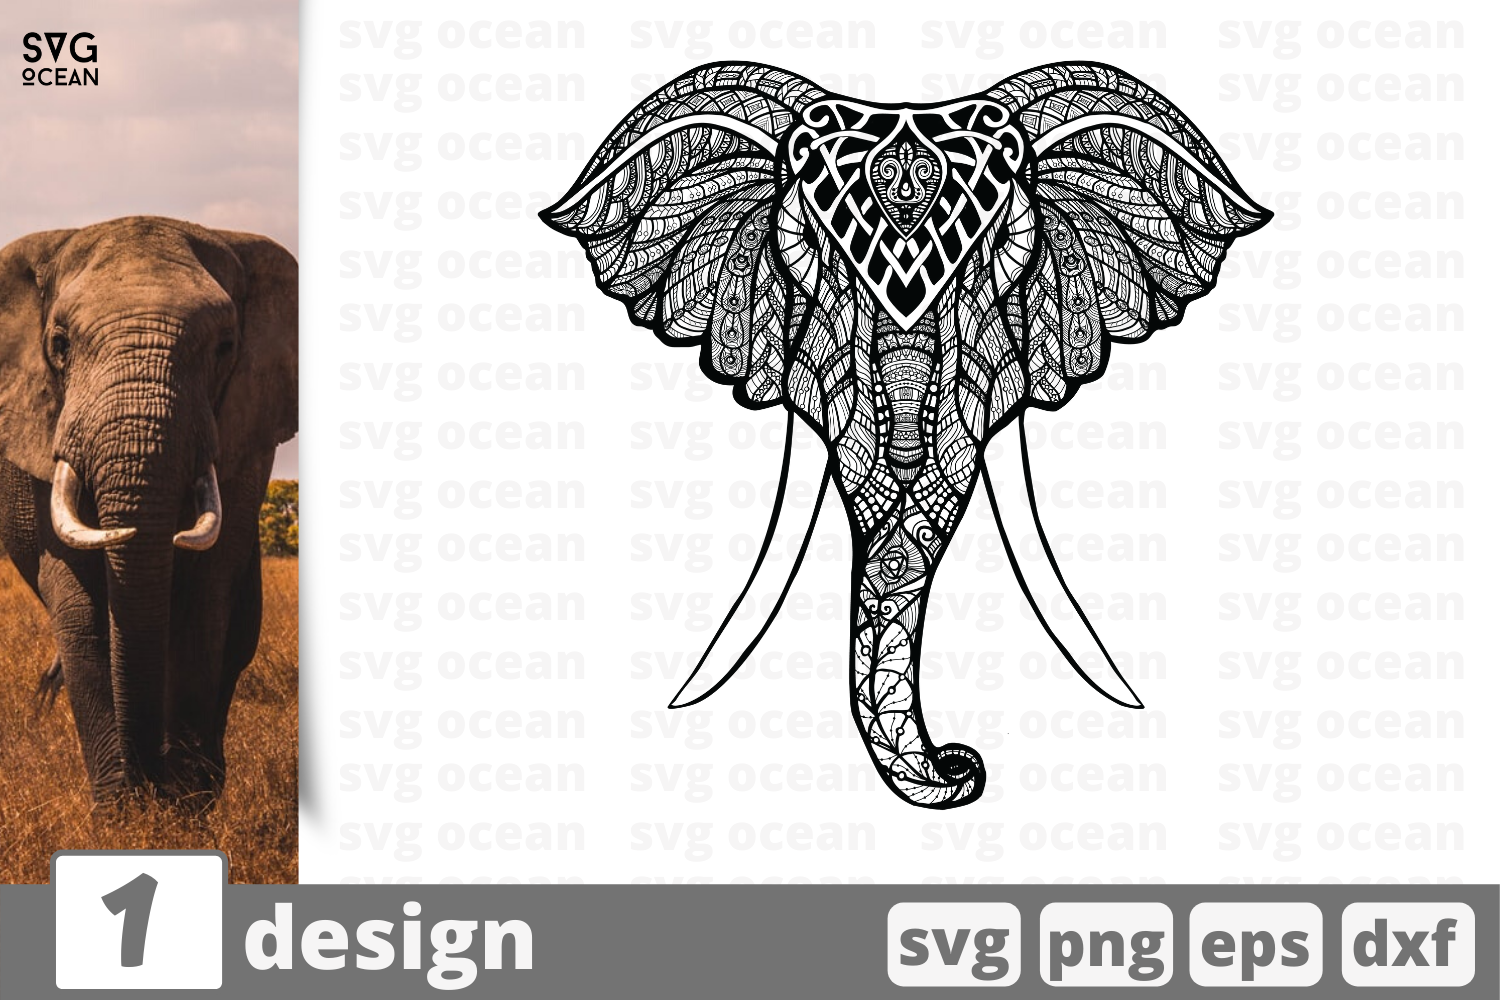 Download Art Collectibles Clip Art Geometric Svg Simple Animal Svg Geometric Elephant Svg Cut File Origami Svg Svg Png Dxf Minimalism Svg Cricut Or Silhouette